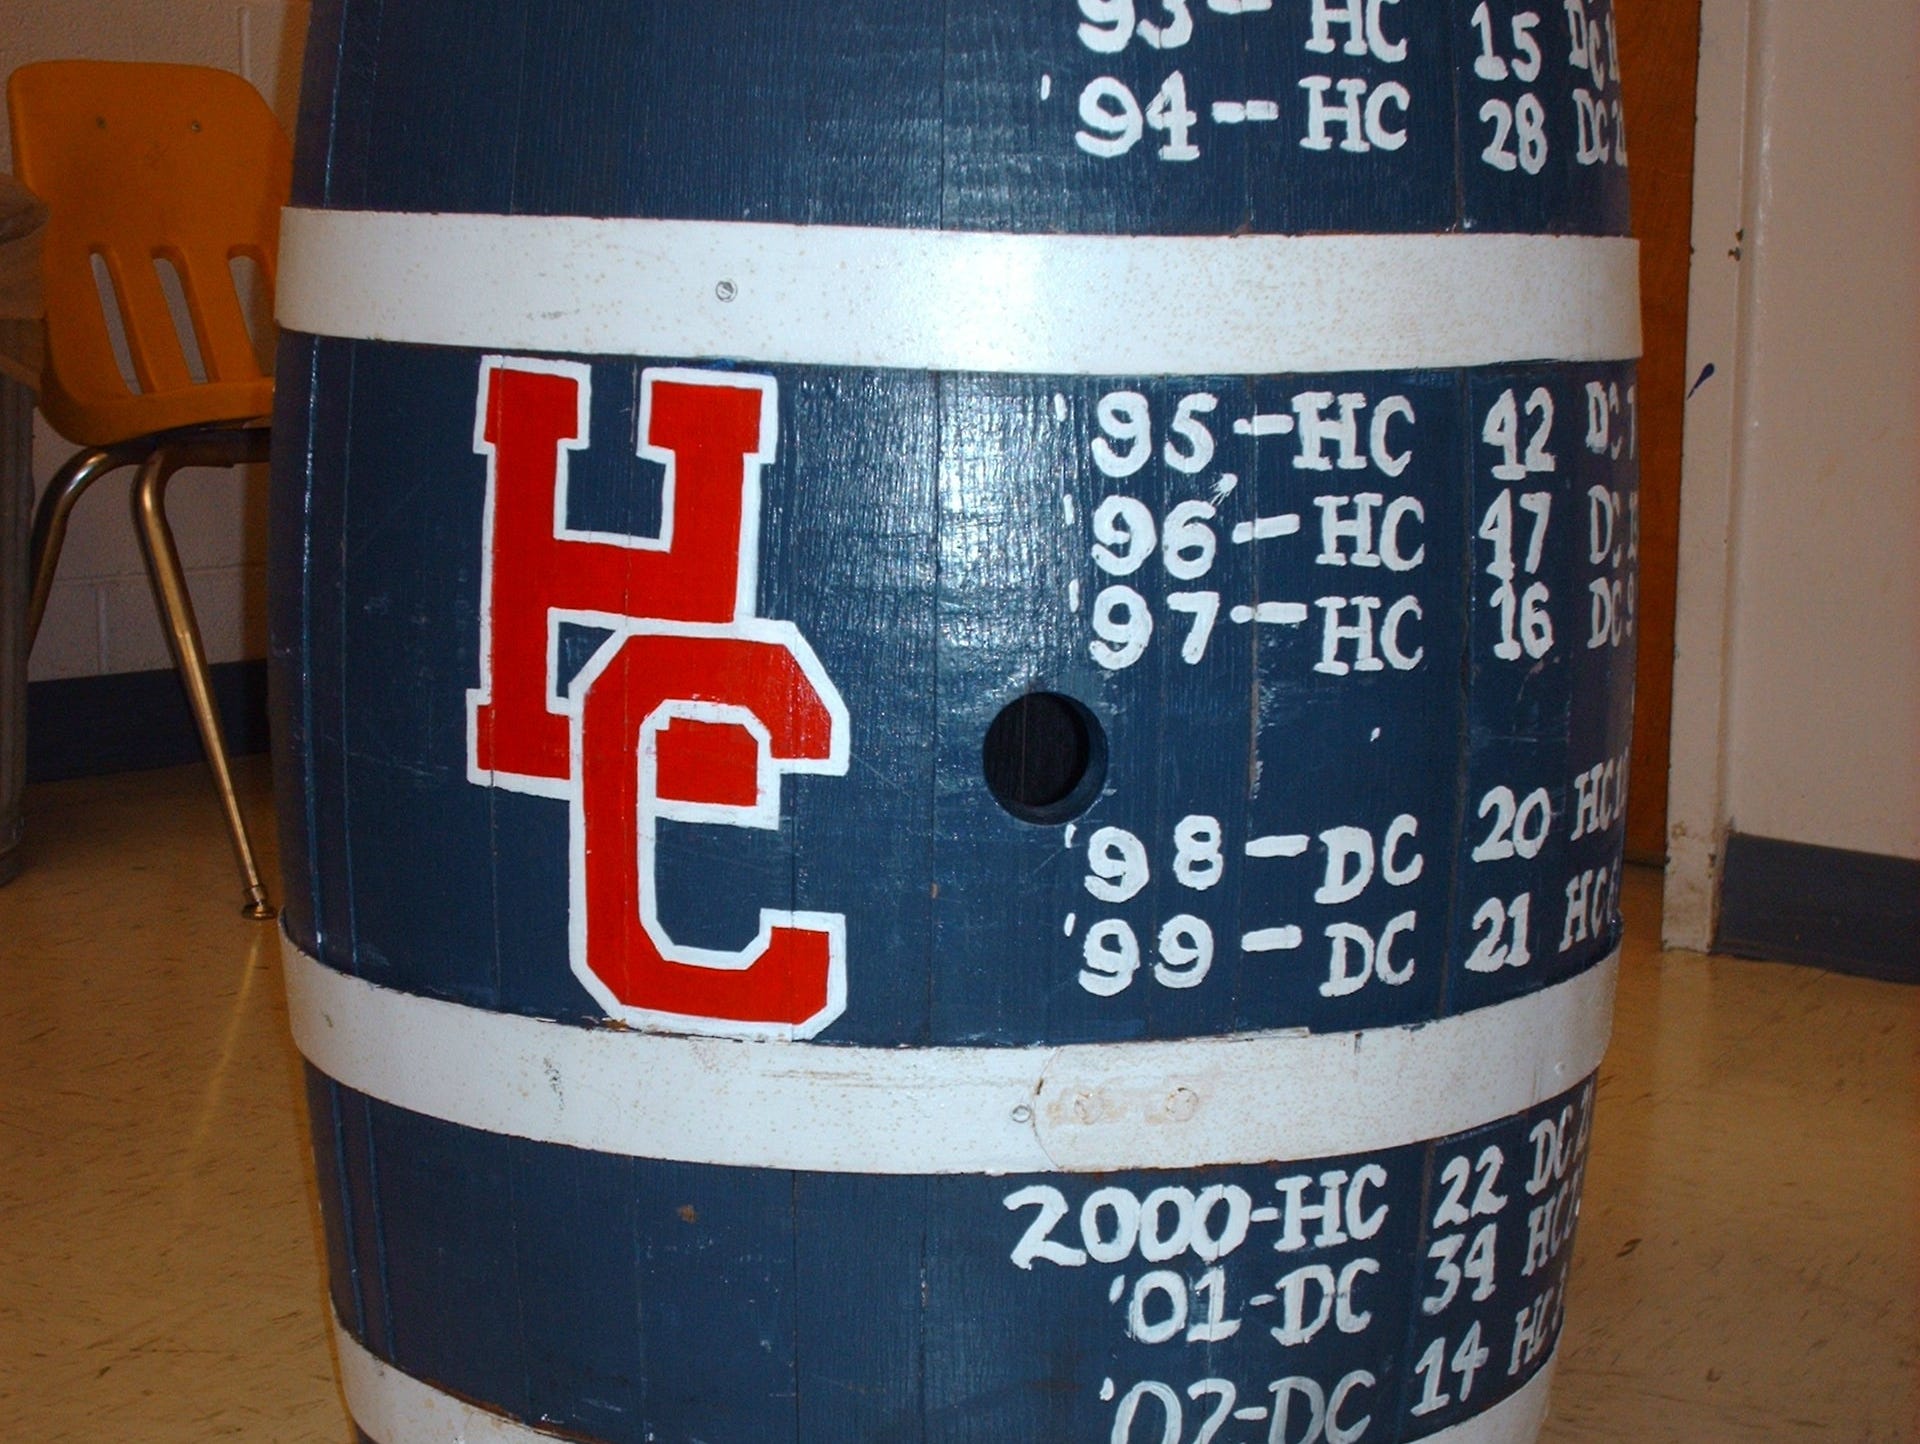 The Victory Barrel is given to the winner of the Dickson County-Henry County game.